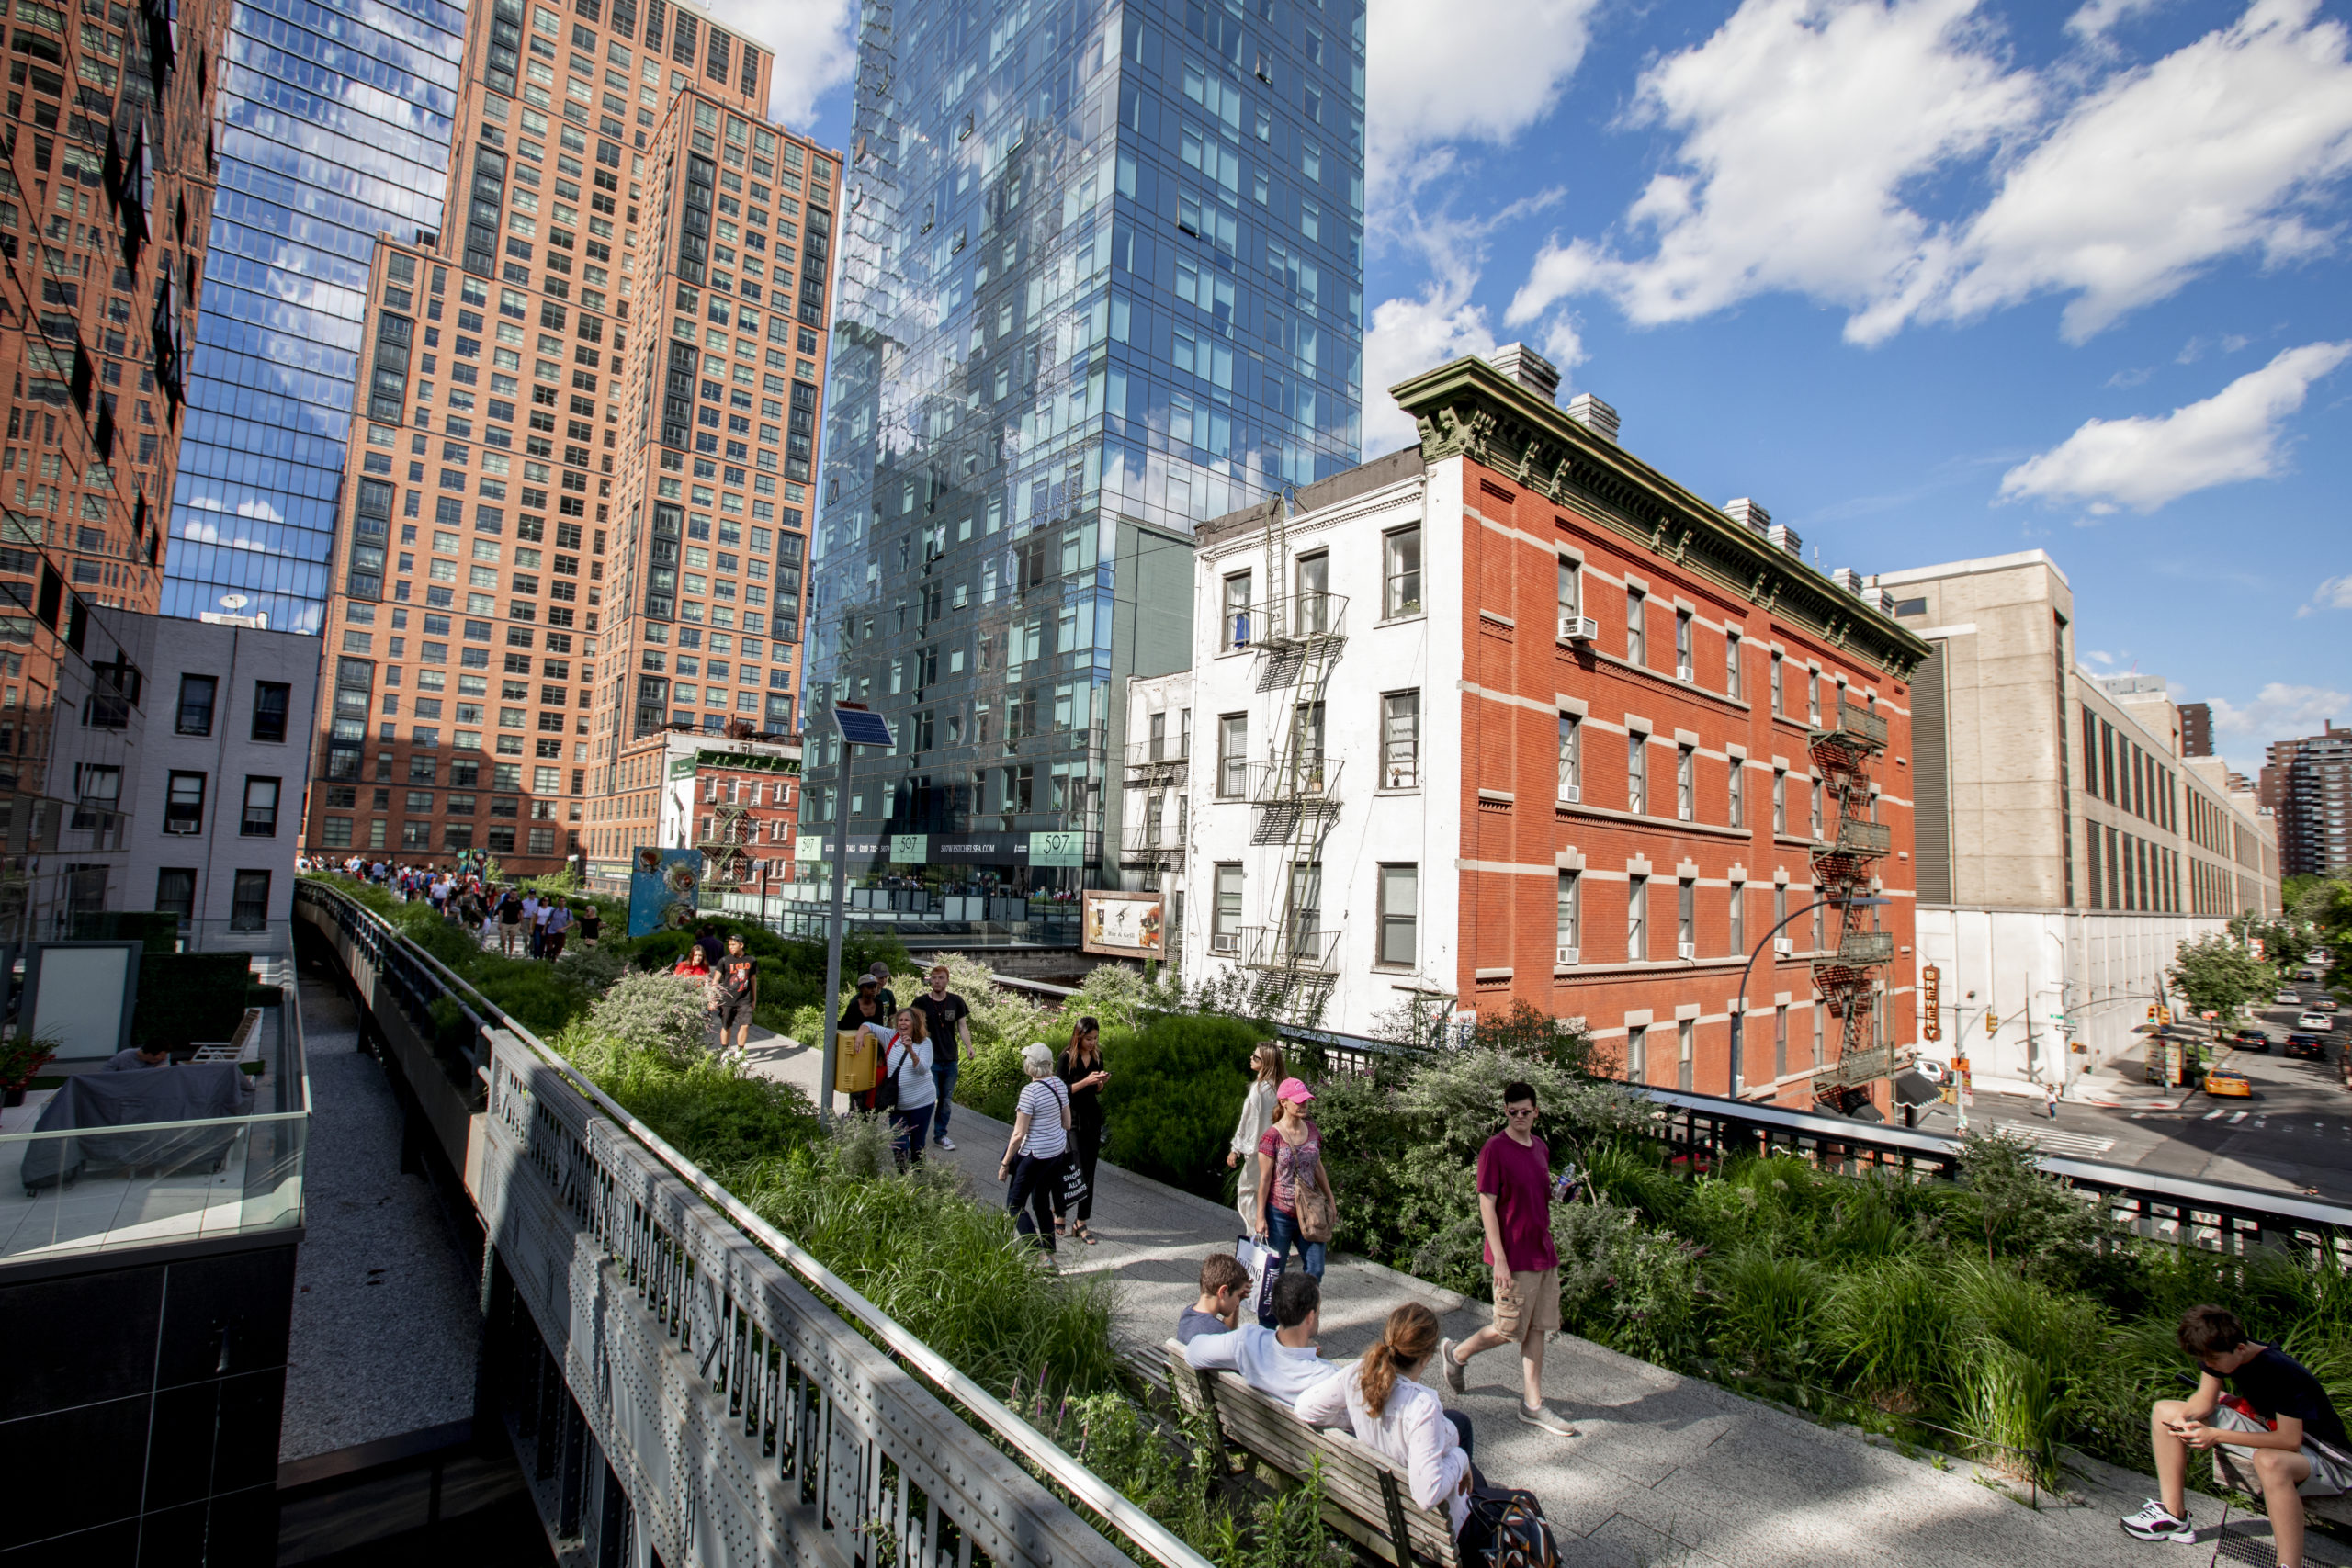 A bird’s-eye view of the High Line in New York City.